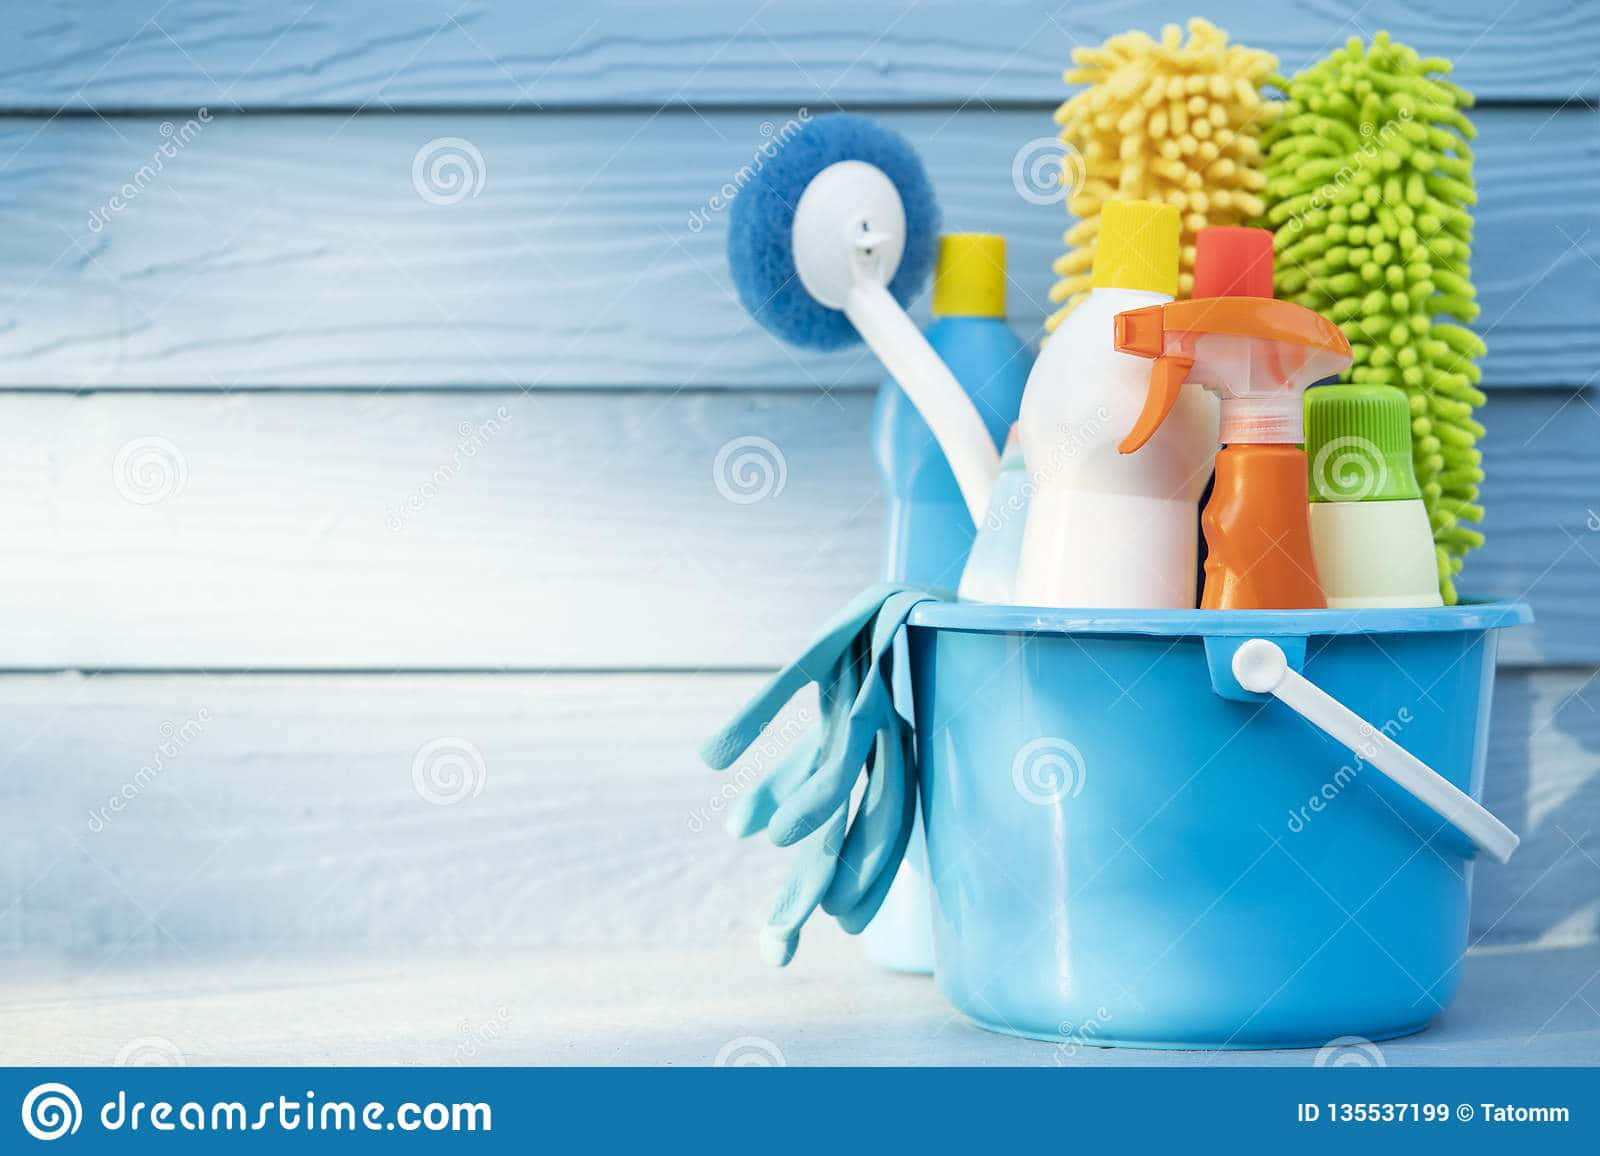 Cleaning Supplies In A Bucket On A Wooden Background